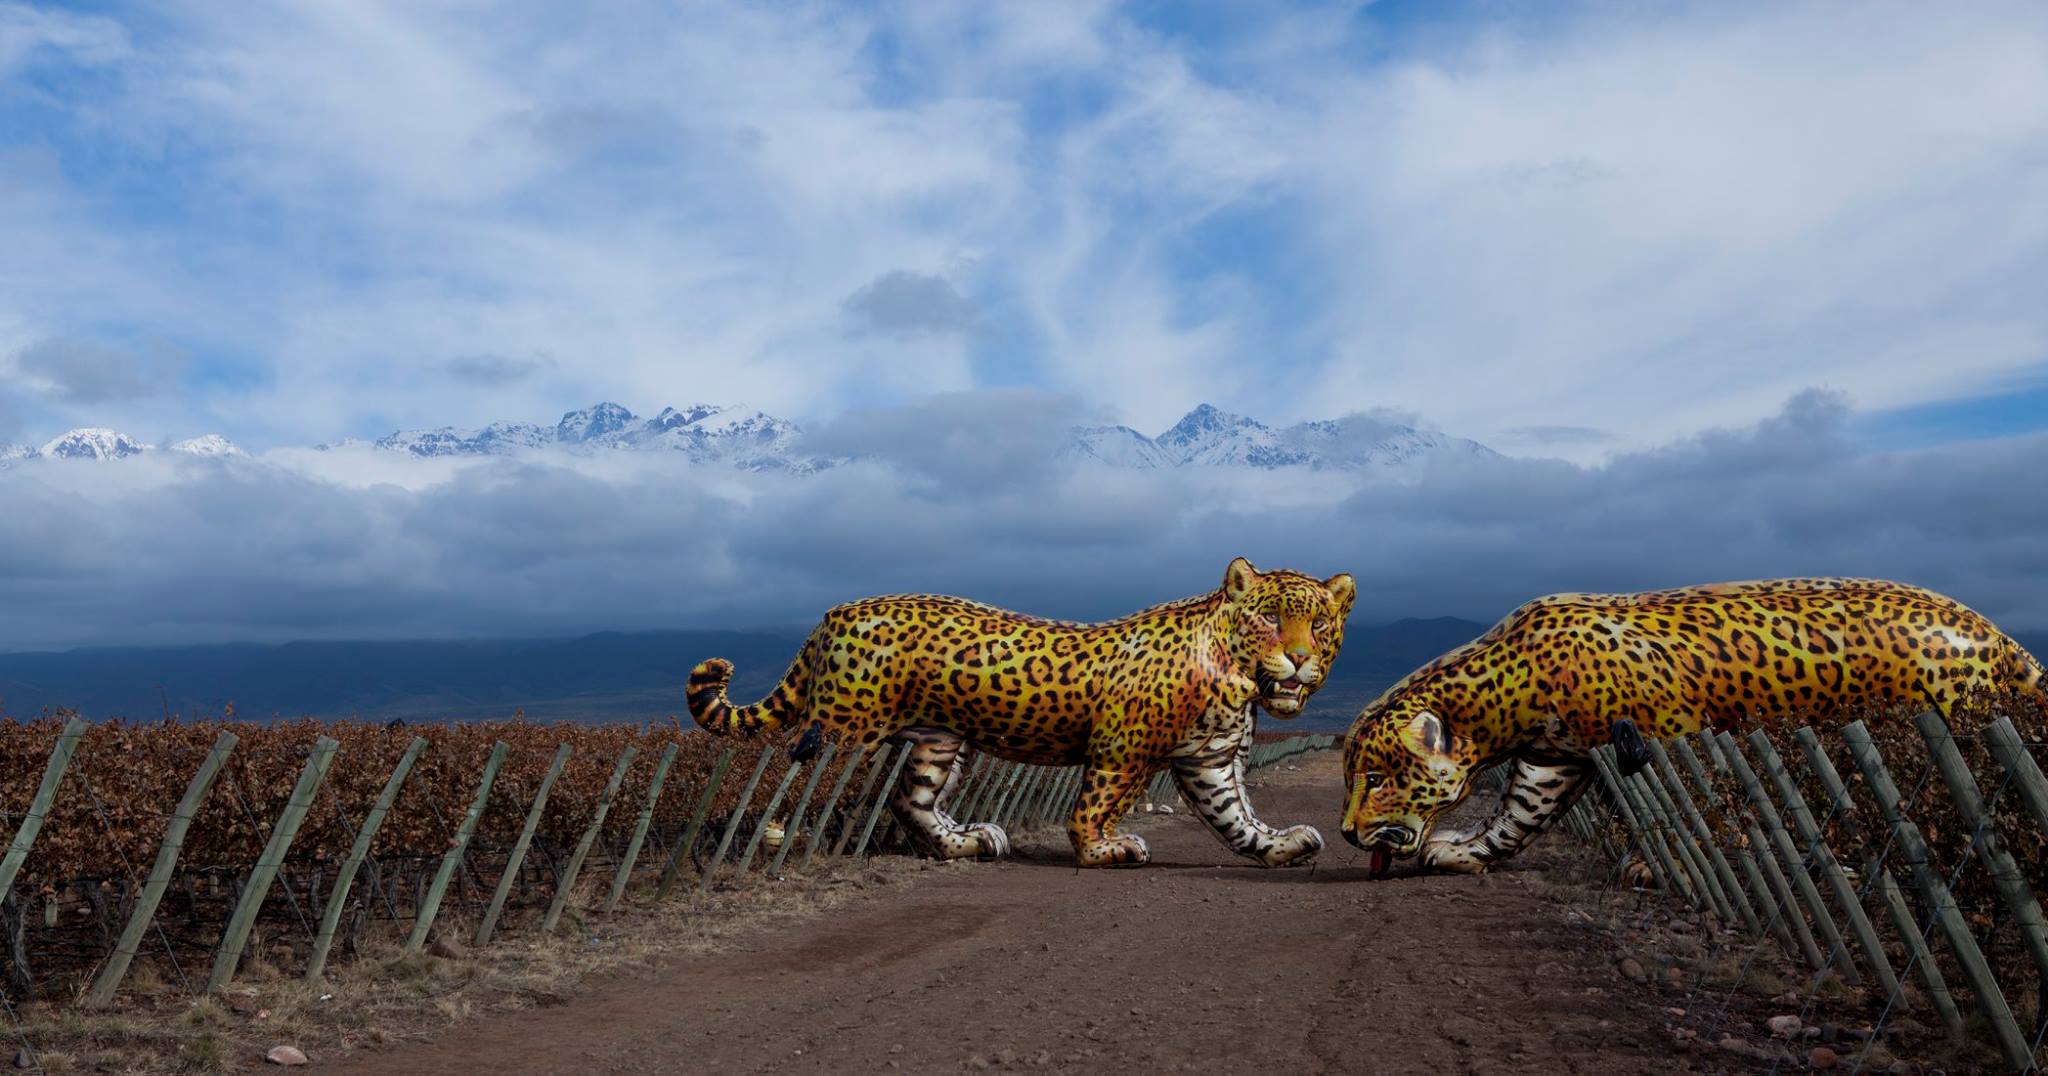 Monteviejo winery and art exhibitions in Mendoza